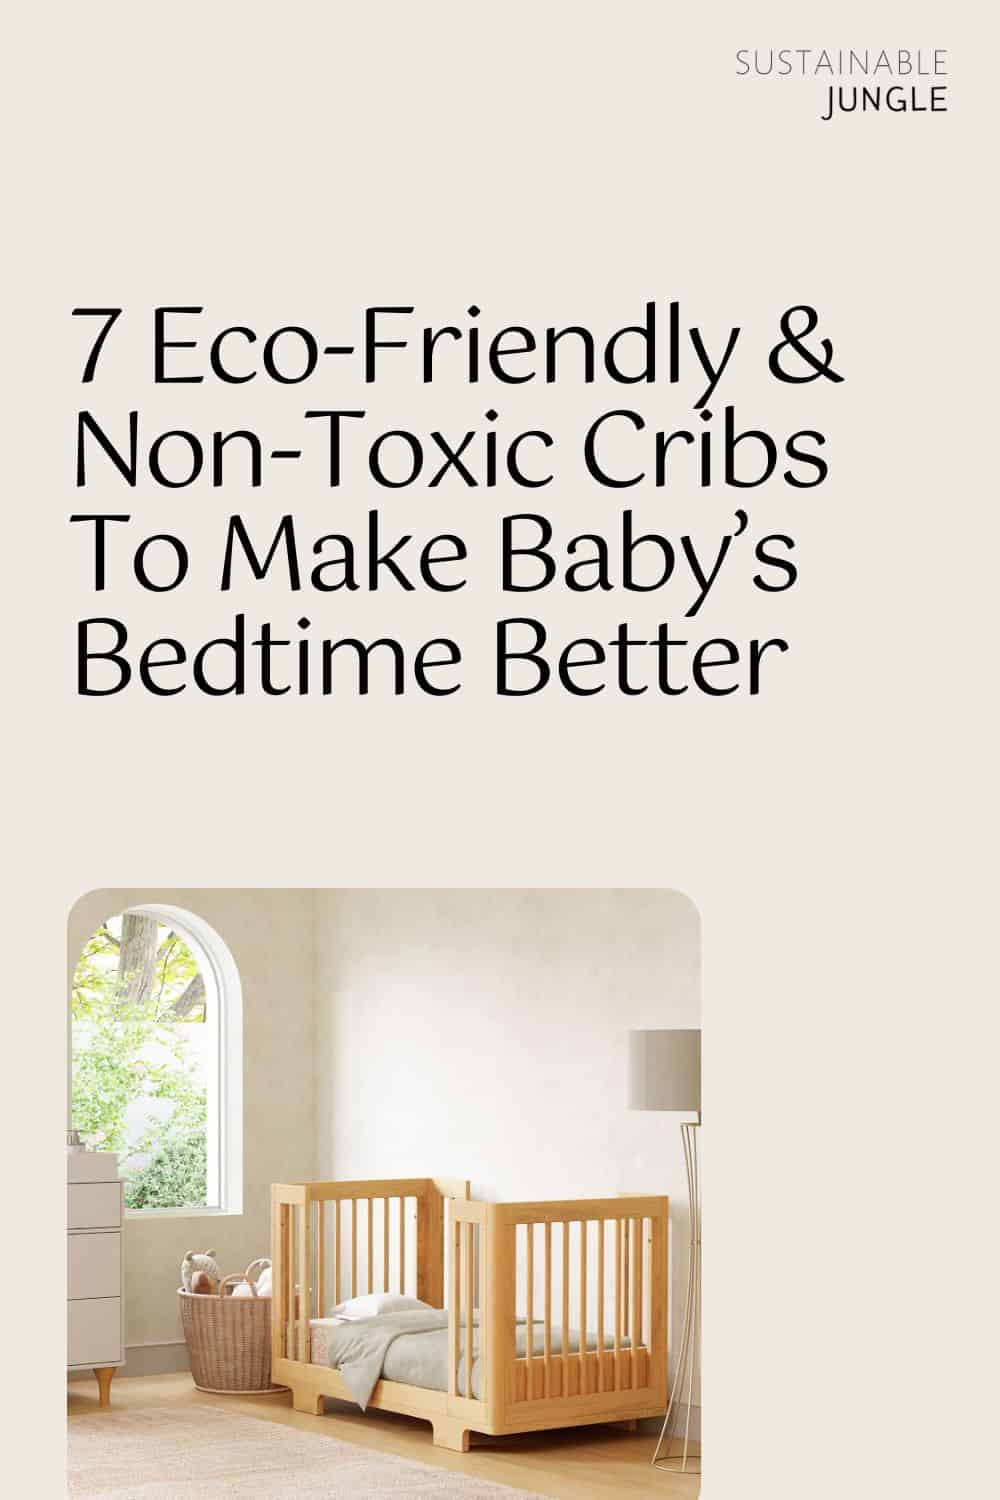 7 Eco-Friendly & Non-Toxic Cribs To Make Baby’s Bedtime Better Image by West Elm #nontoxiccrib #bestnontoxiccribs #nontoxicbabycribs #ecofriendlycribs #ecobabycribs #ssolidwoodnontoxiccrib #sustainablejungle